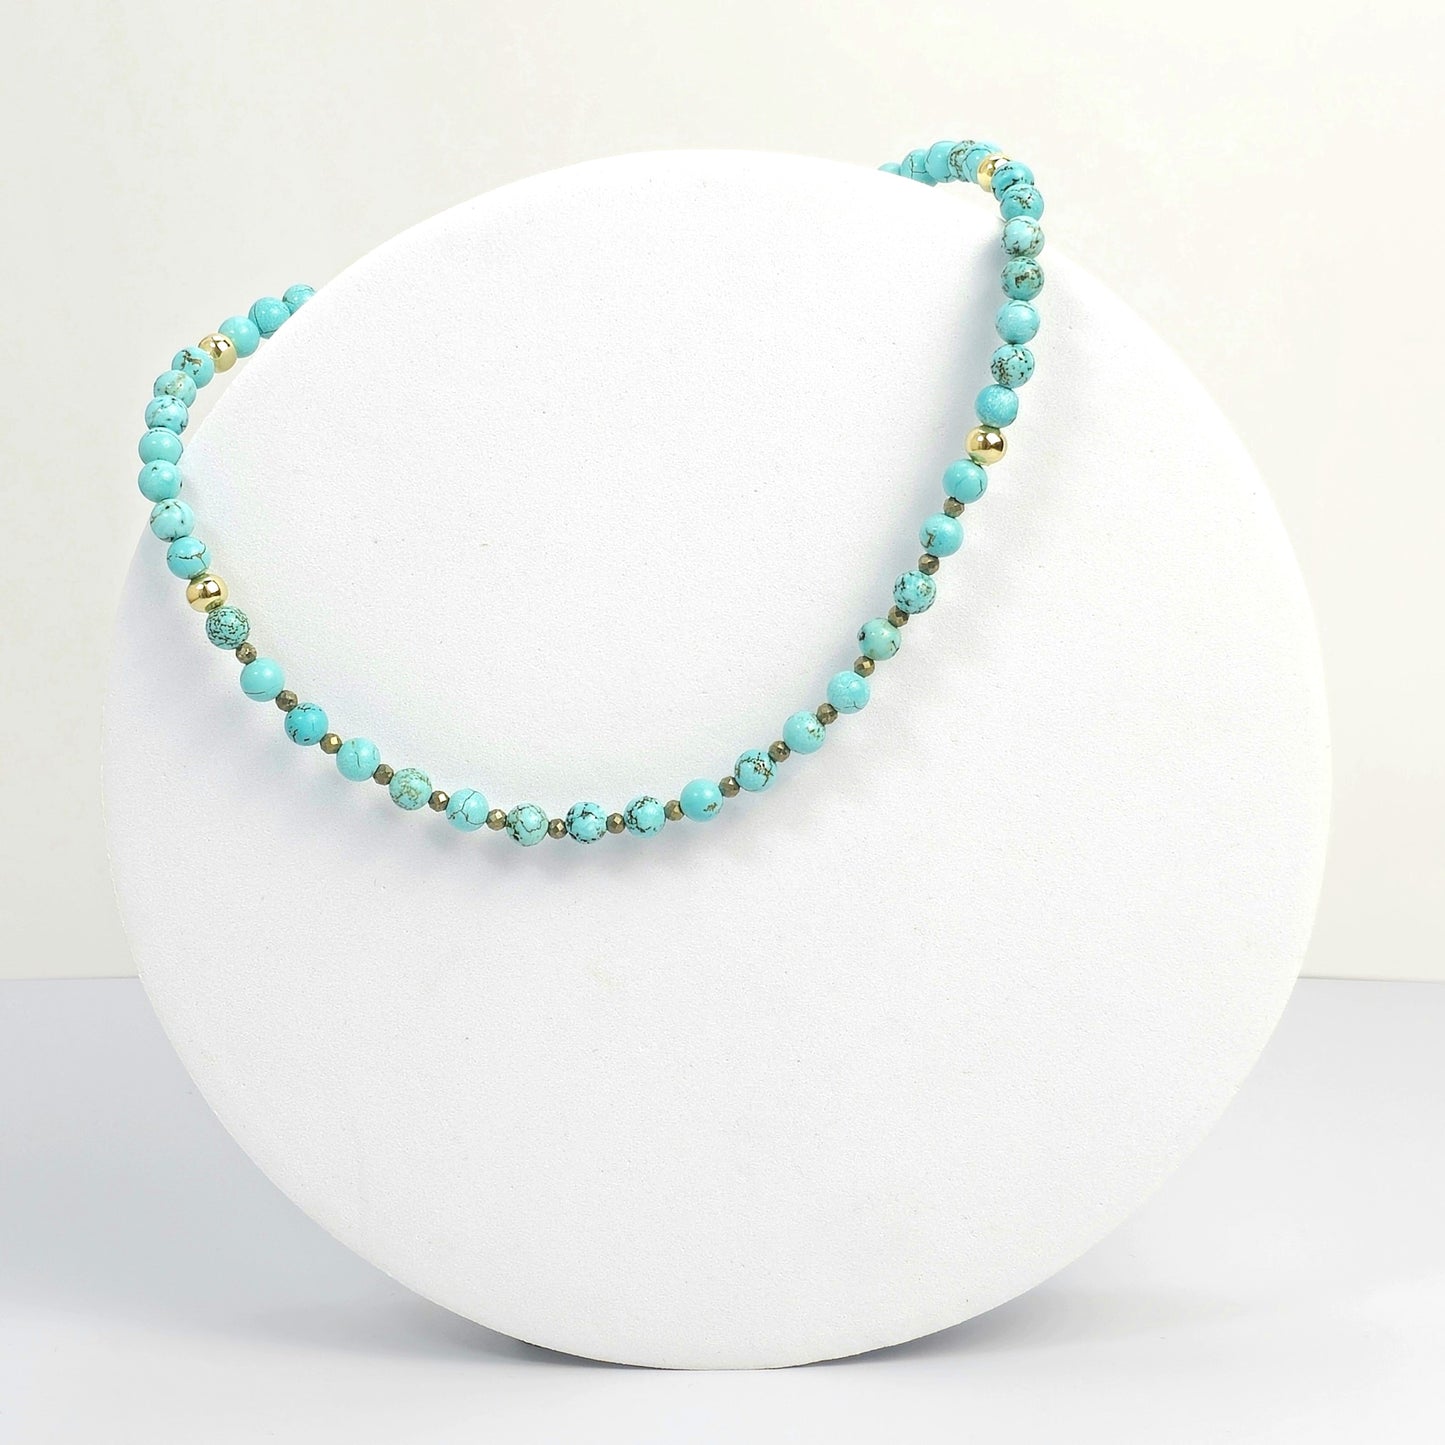 Turquoise Aurora Choker: Elegance with Pyrite Accents